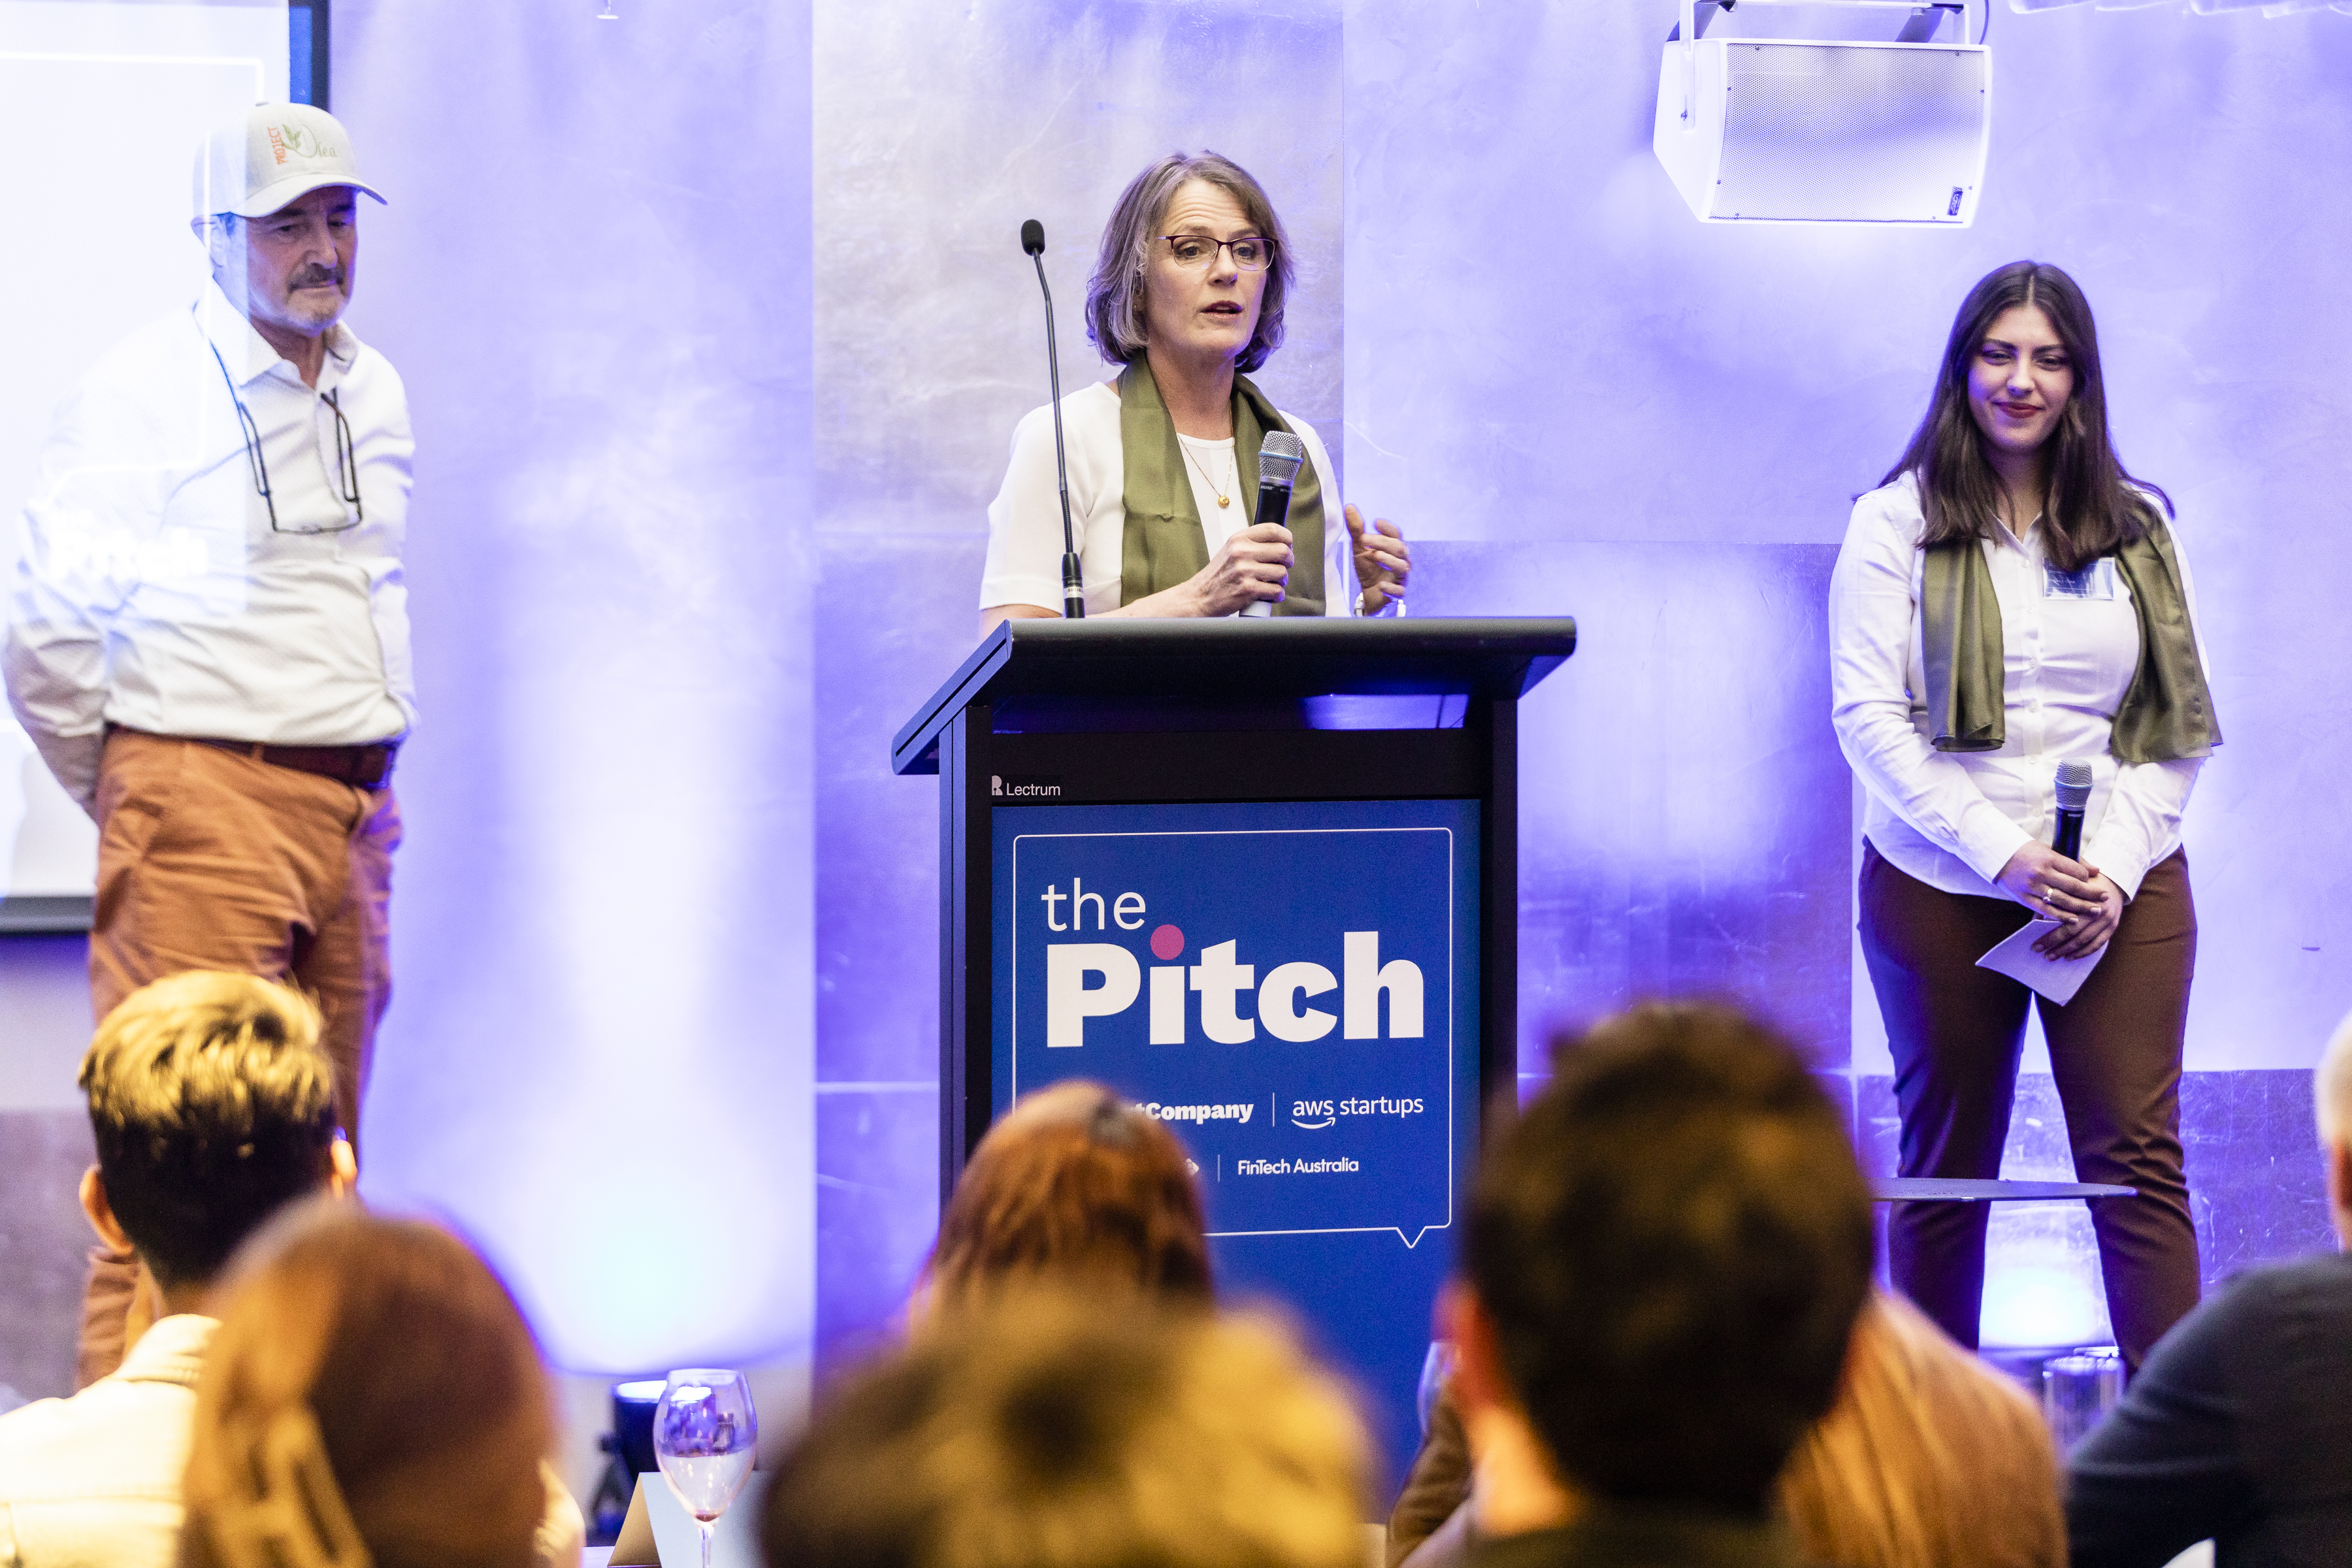 The Pitch competition